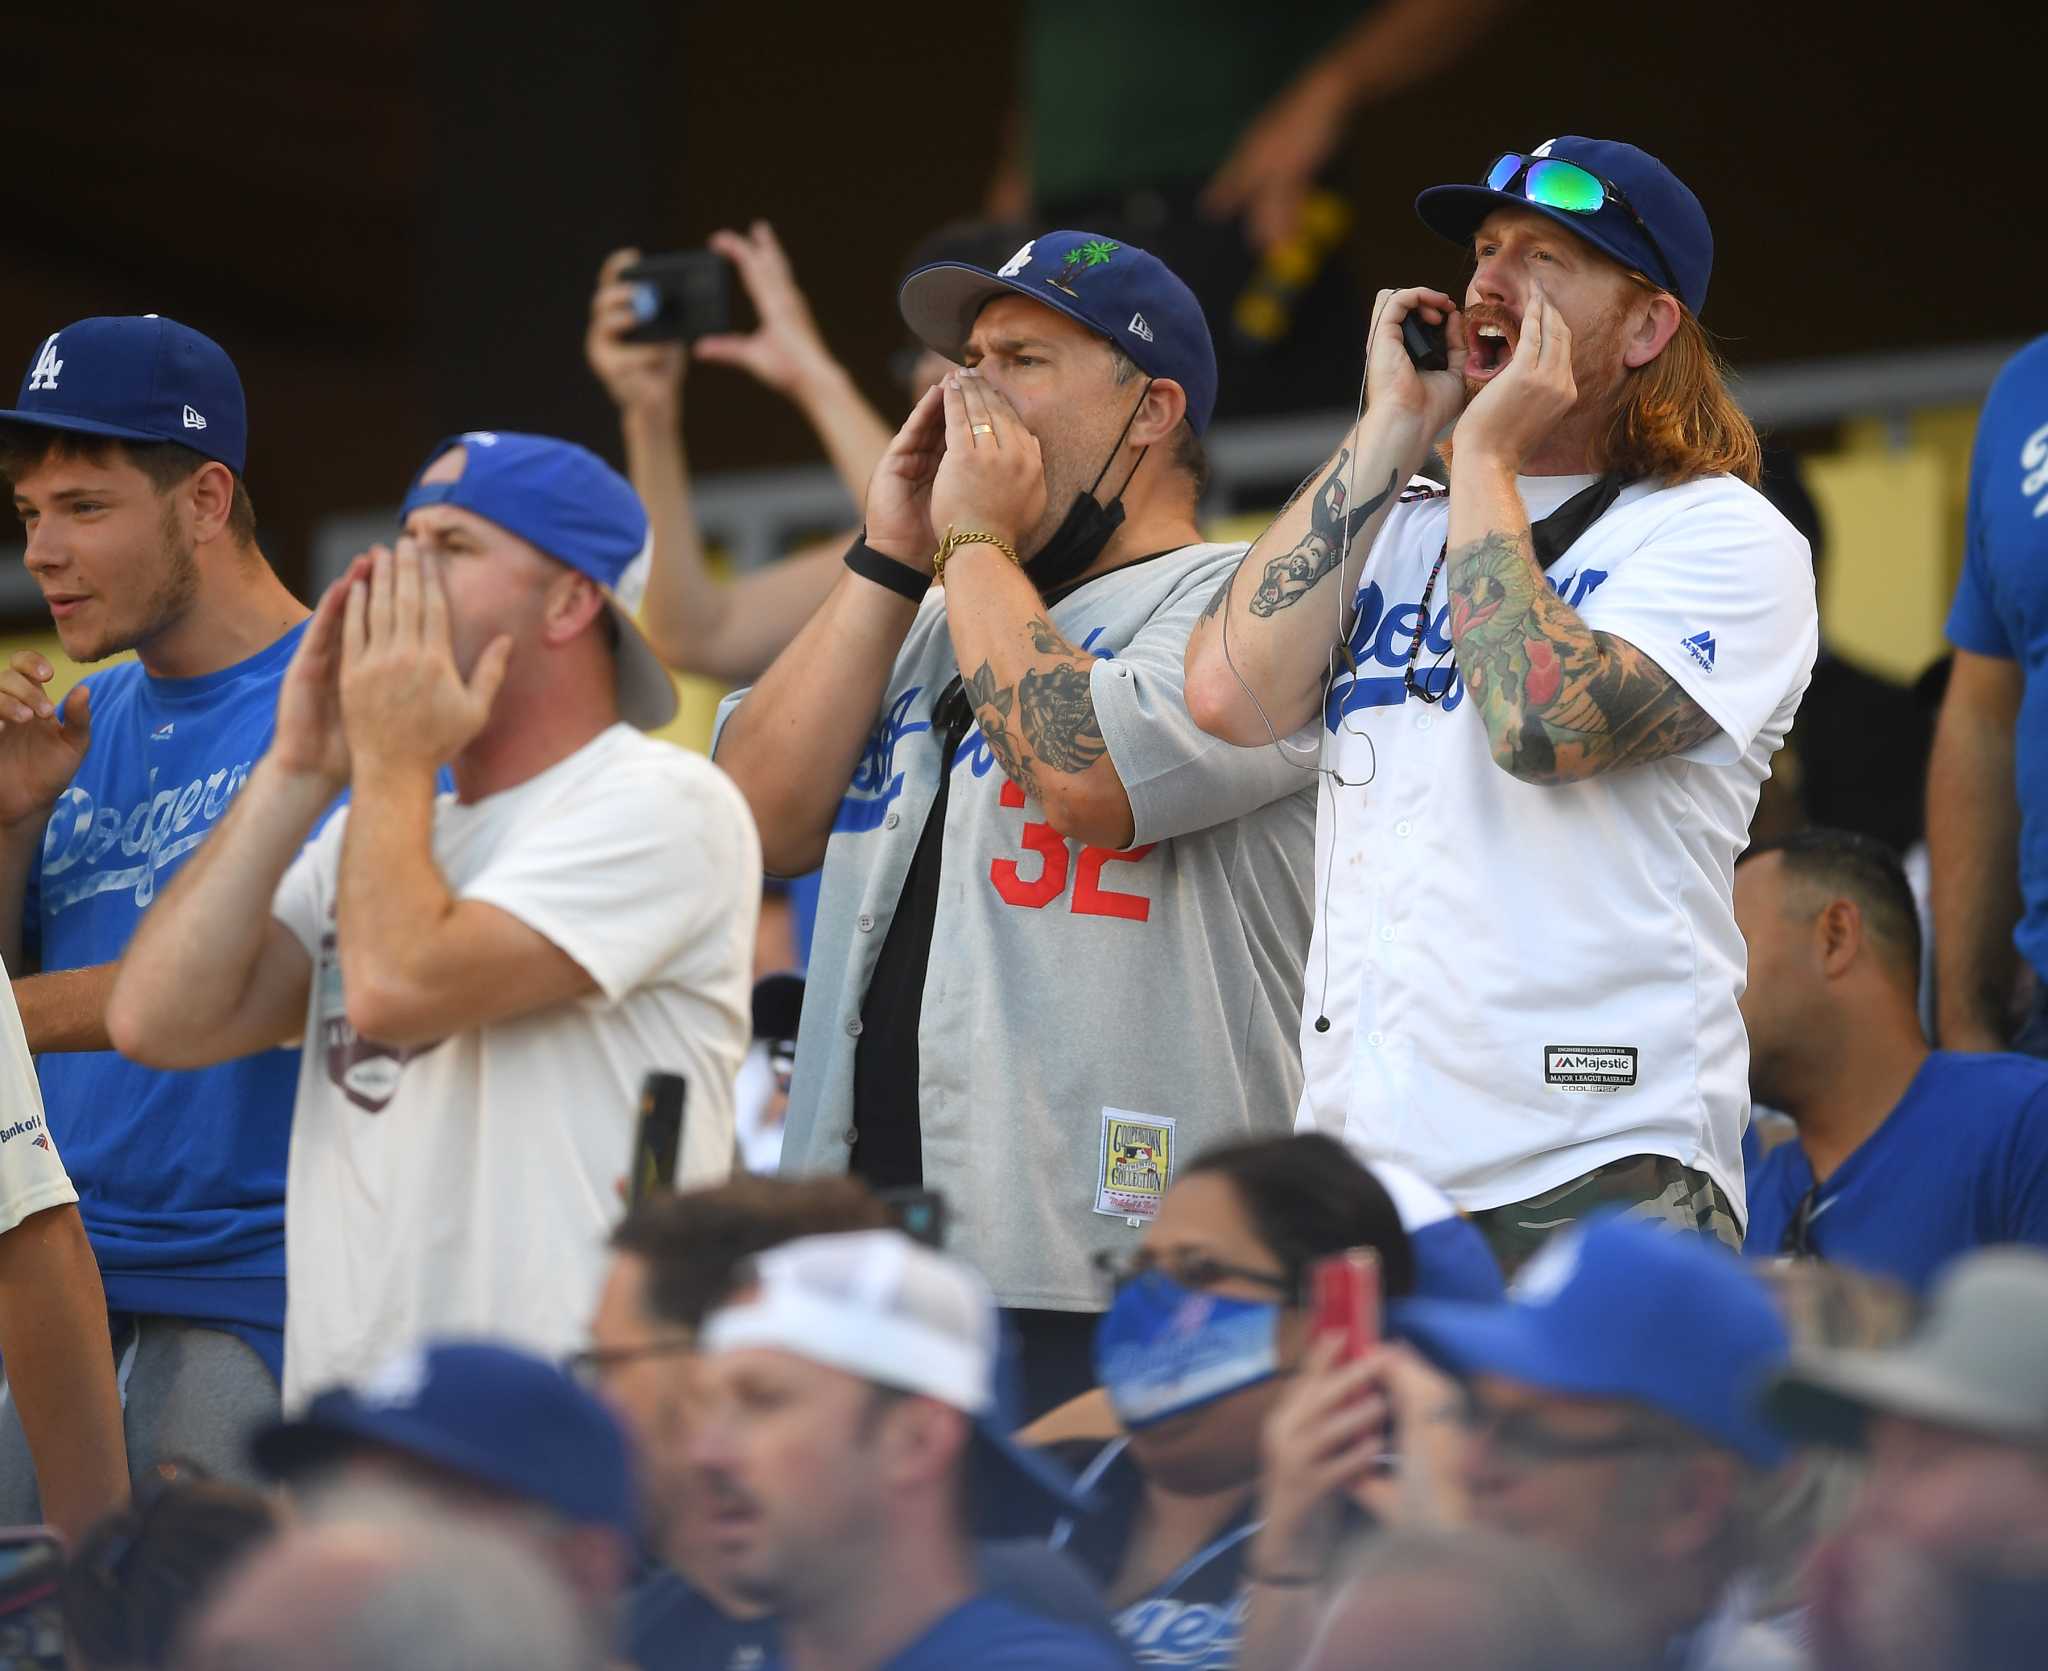 Astros fans somehow in shock that they were booed at Dodgers Stadium